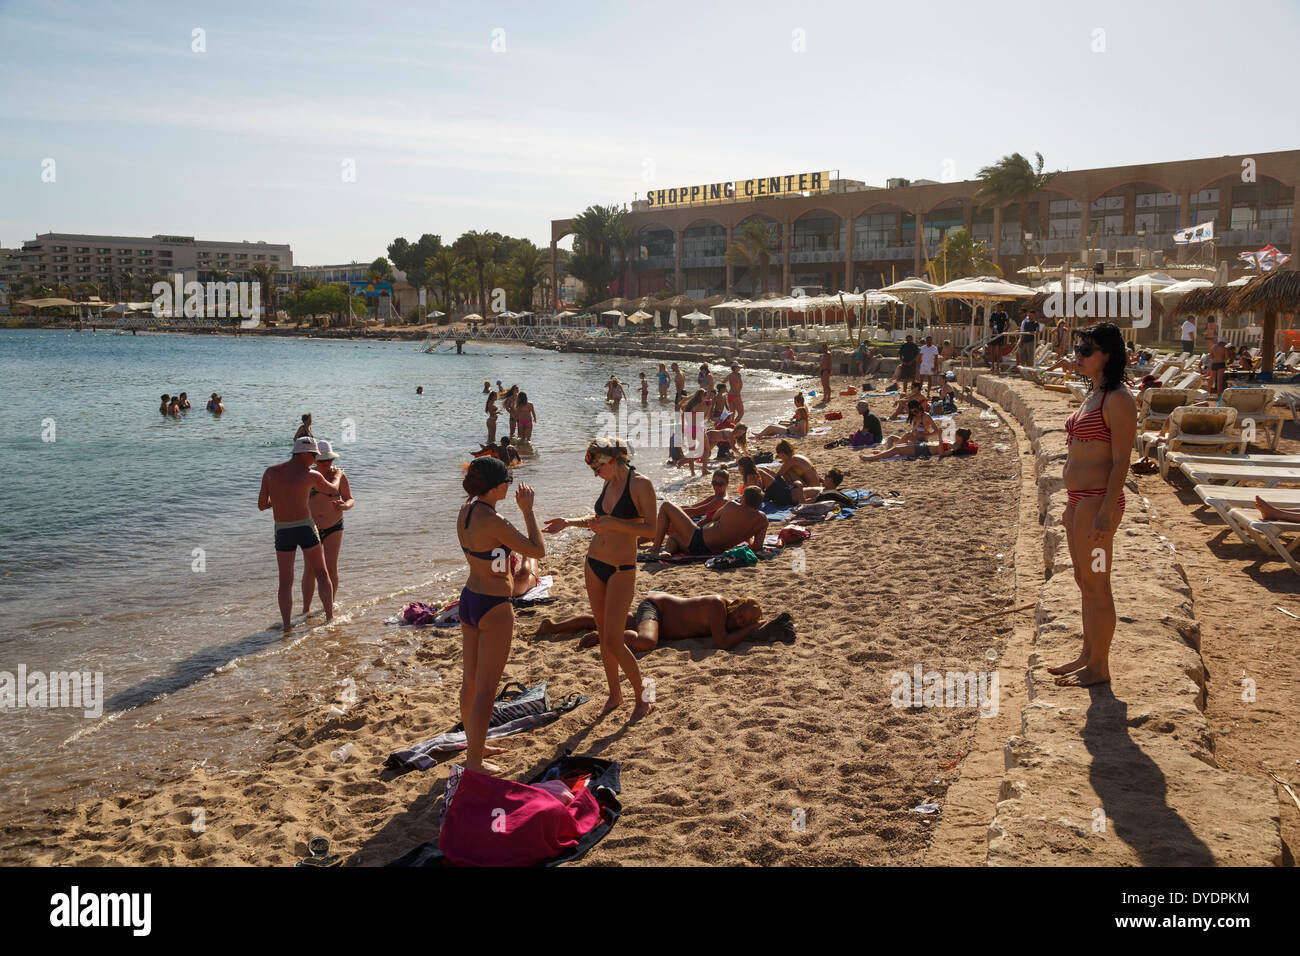 People at the beach in Eilat, Israel. Stock Photo